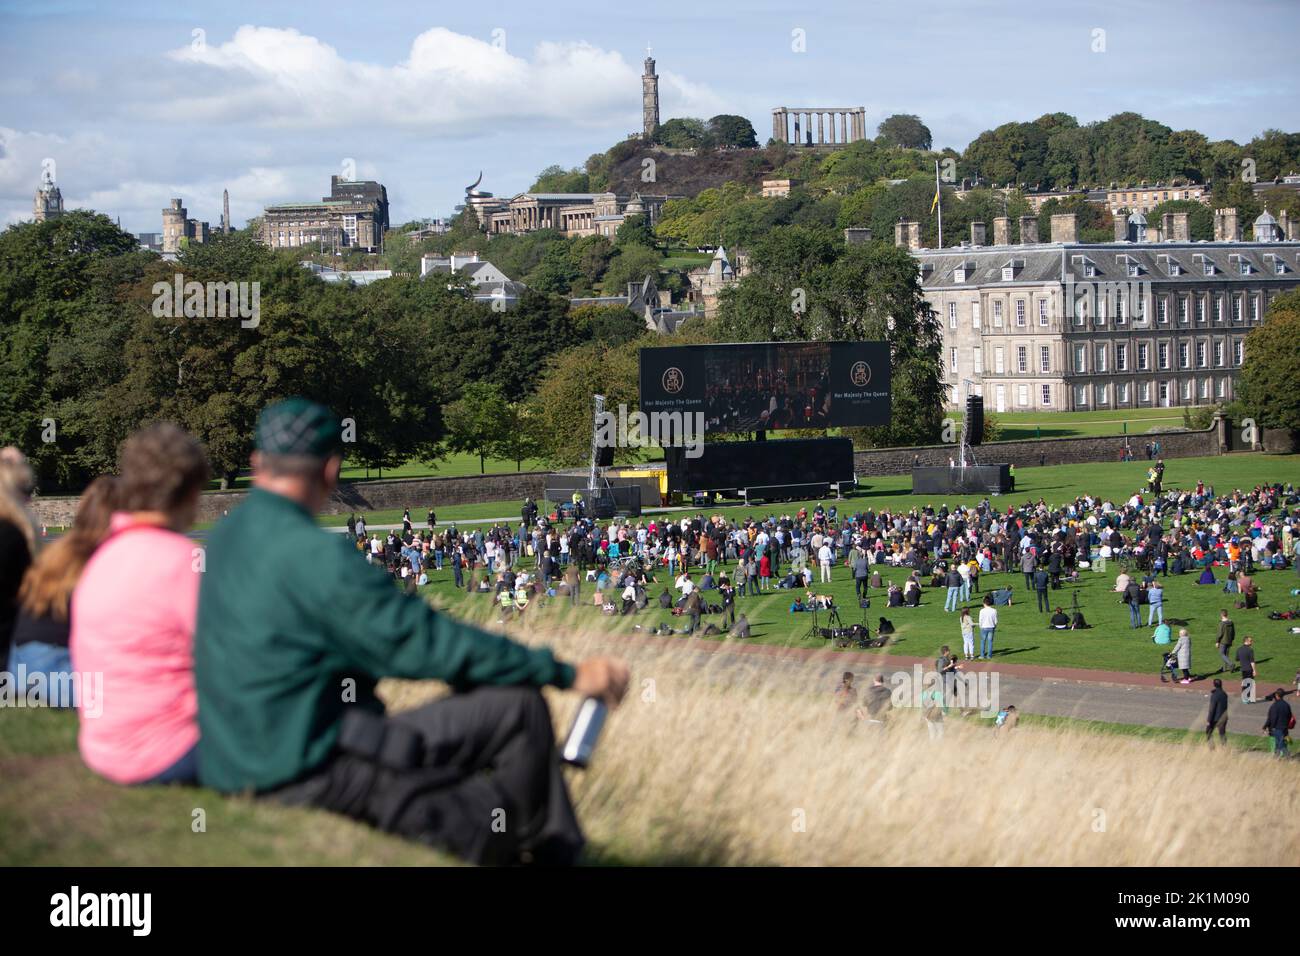 Edinburgh 19th September 2022. Funeral of The Queen Elizabeth II on 19th September 2022 take place in London. A big screen has been installed in Holyrood gardens in Edinburgh where members of the public can go and see the funeral. Pic Credit: Pako Mera/Alamy Live News Stock Photo